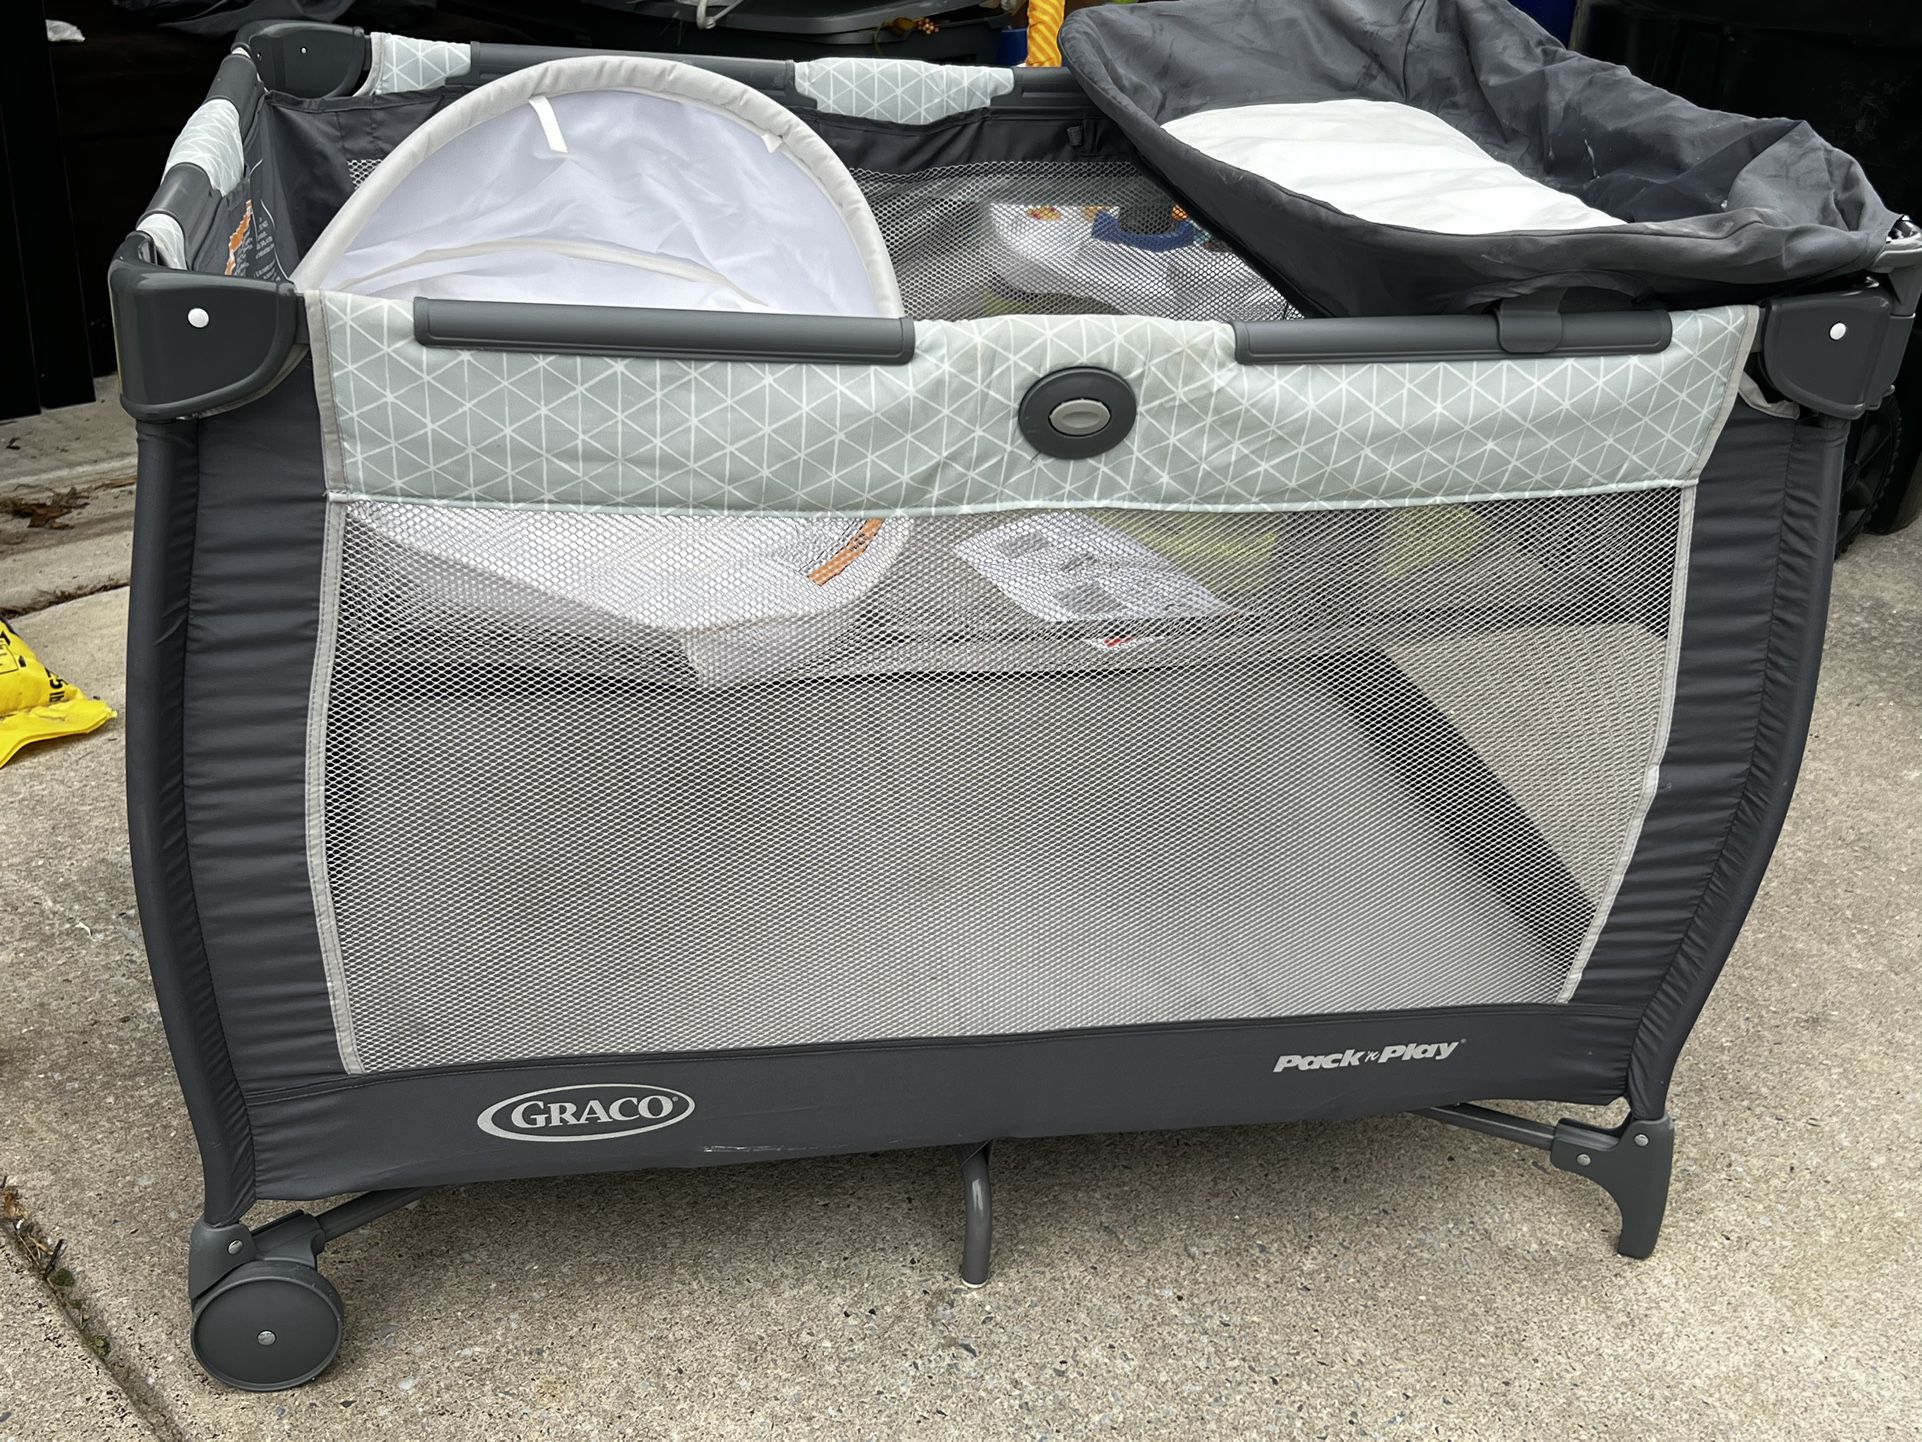 Pack And Play Baby Playpen Bassinet 